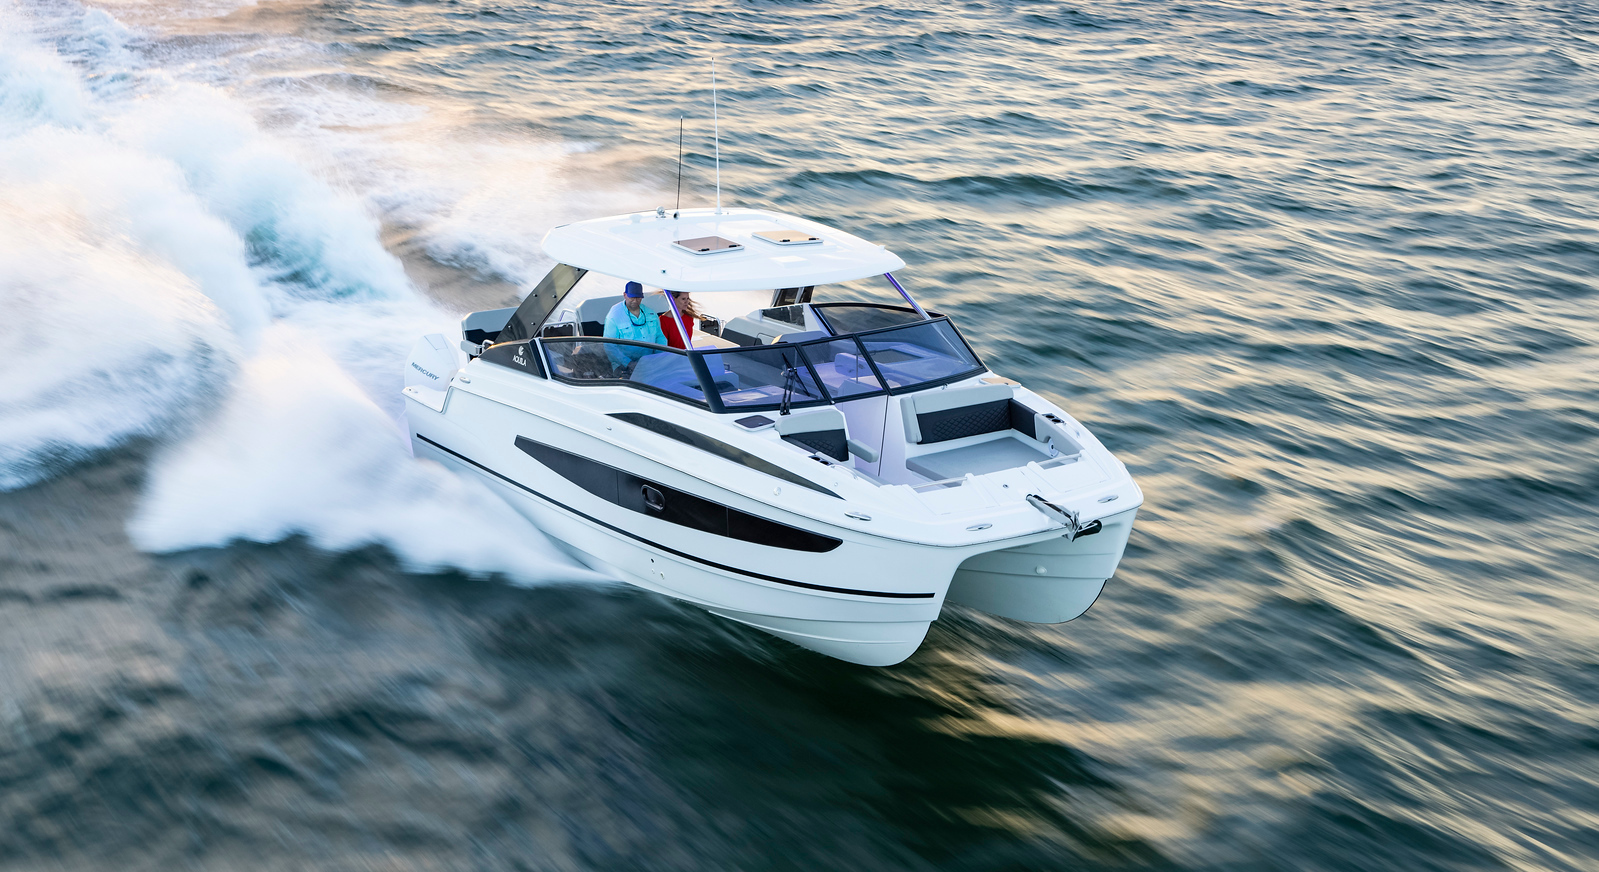 AQUILA POWER CATAMARANS EXPANDS ITS GLOBAL PRESENCE WITH NEW DEALER IN PANAMA